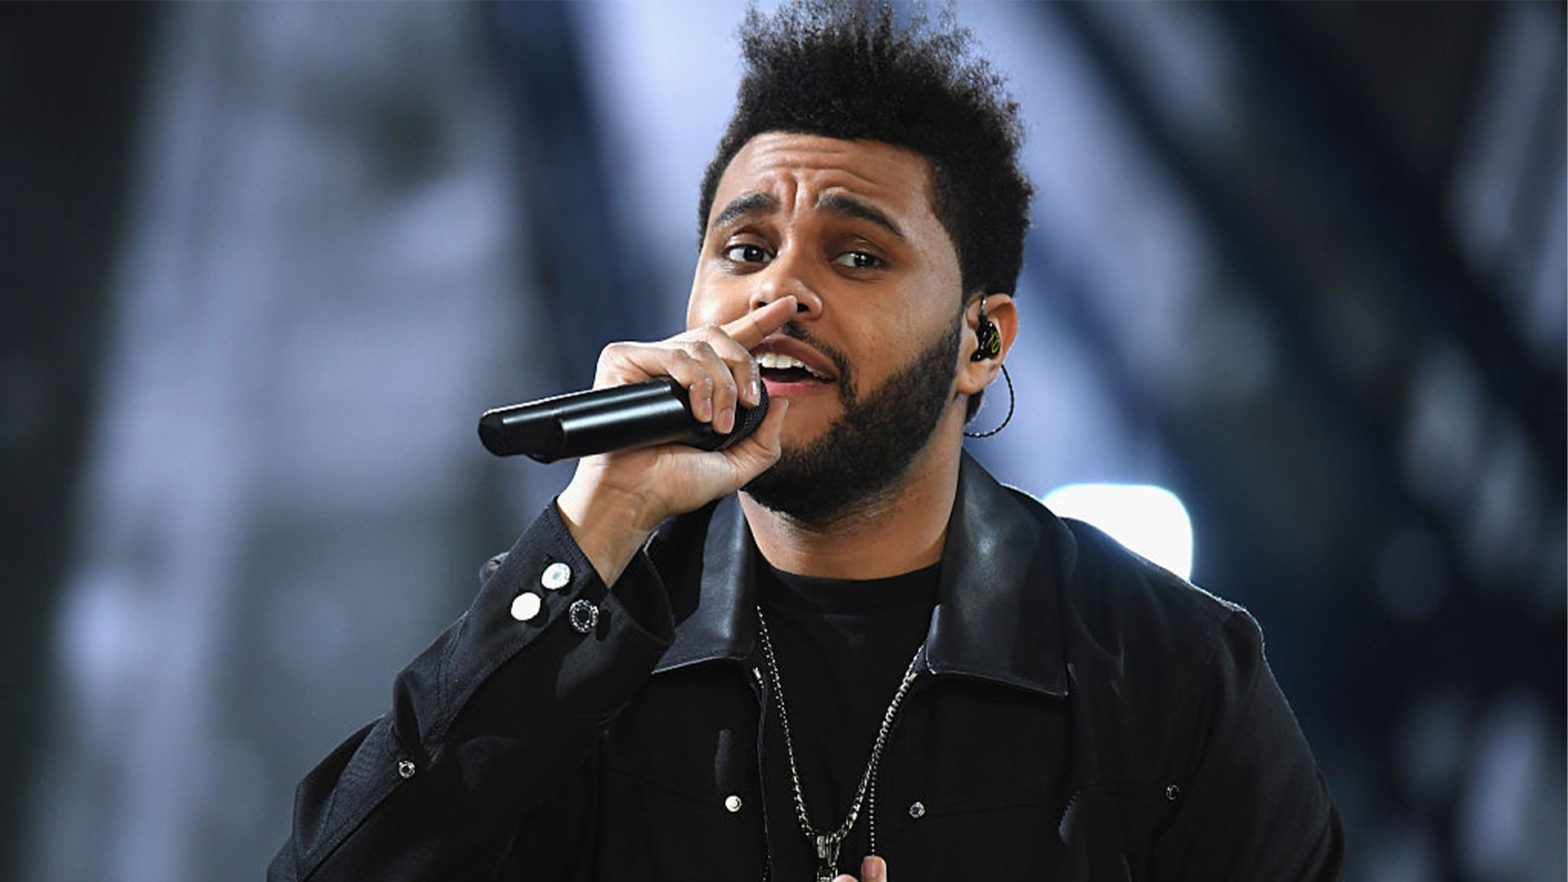 The Weeknd Breaks Record With The Highest-Grossing Show By A Black Artist — Here's How Much It Raked In